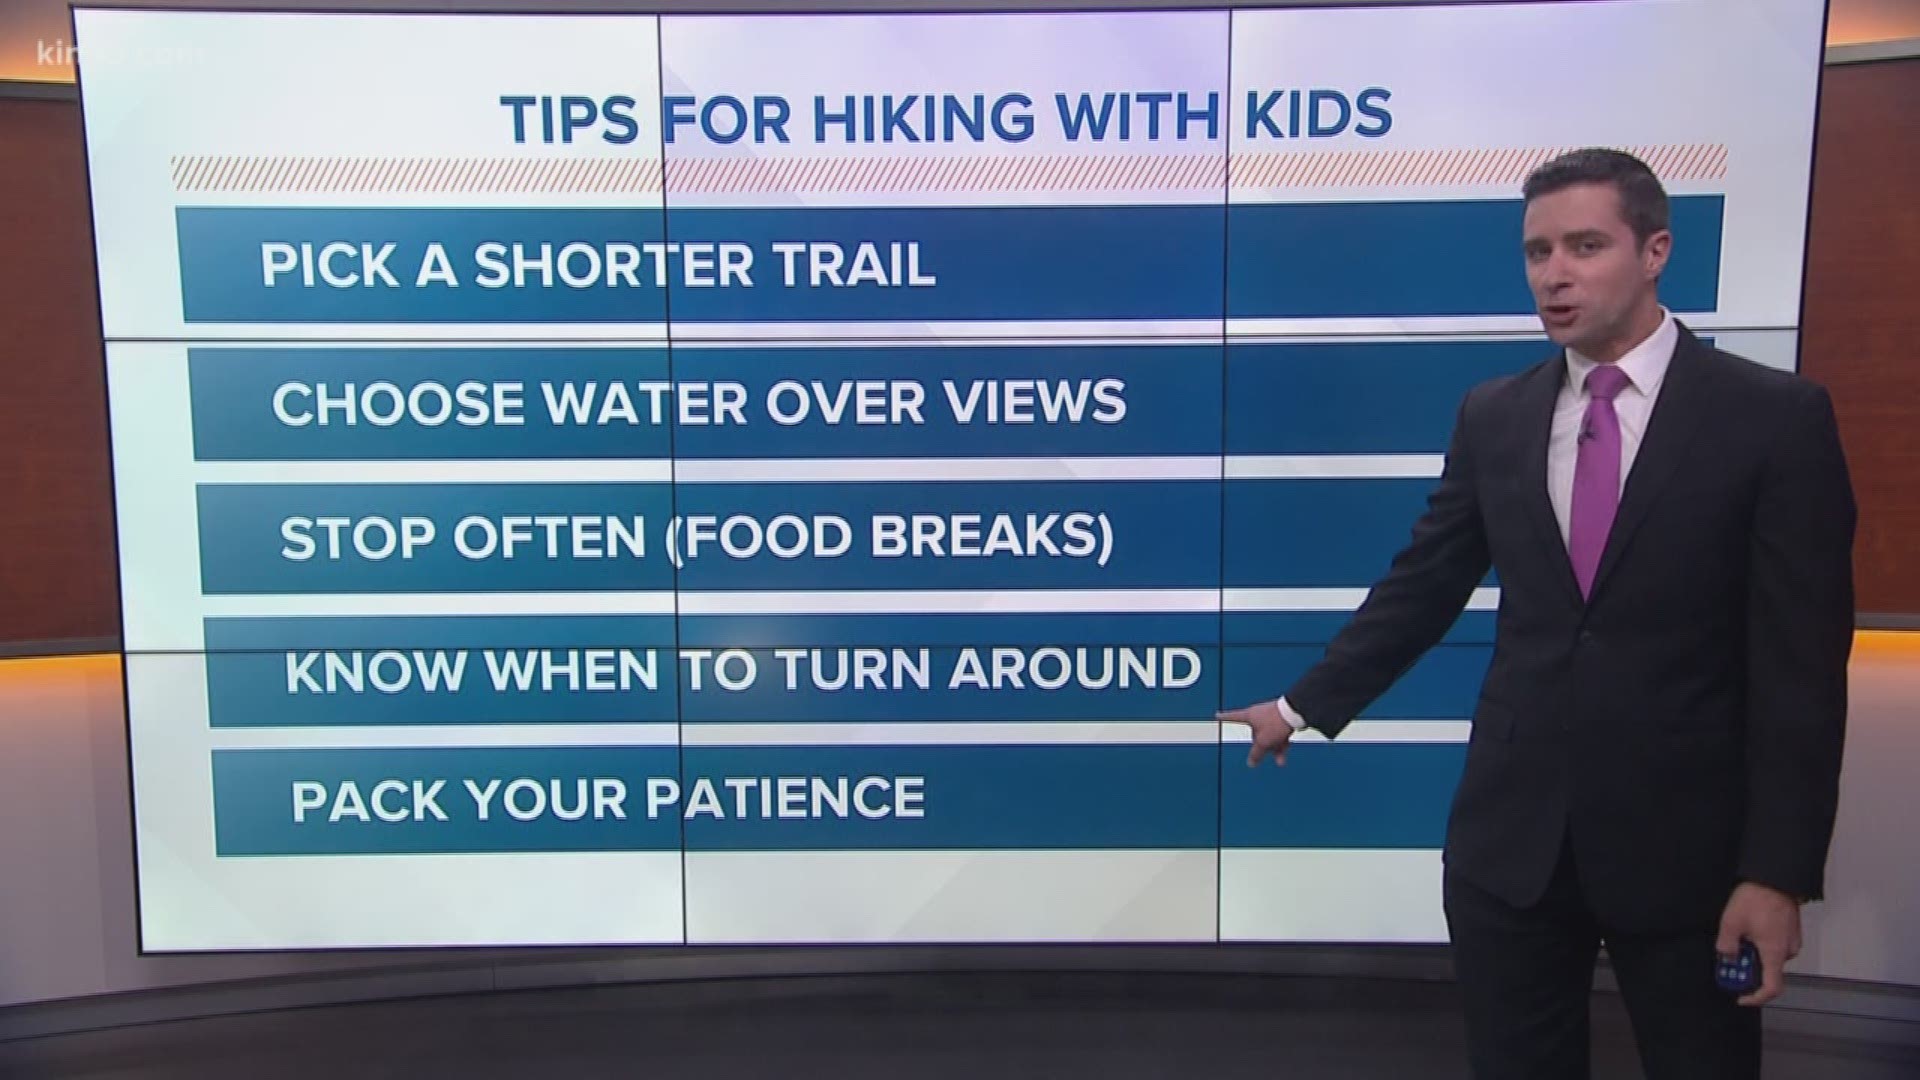 KING 5's resident hiking expert Ben Dery has some tips for taking your little ones along on a hike as well as some kid-friendly hikes around Washington.